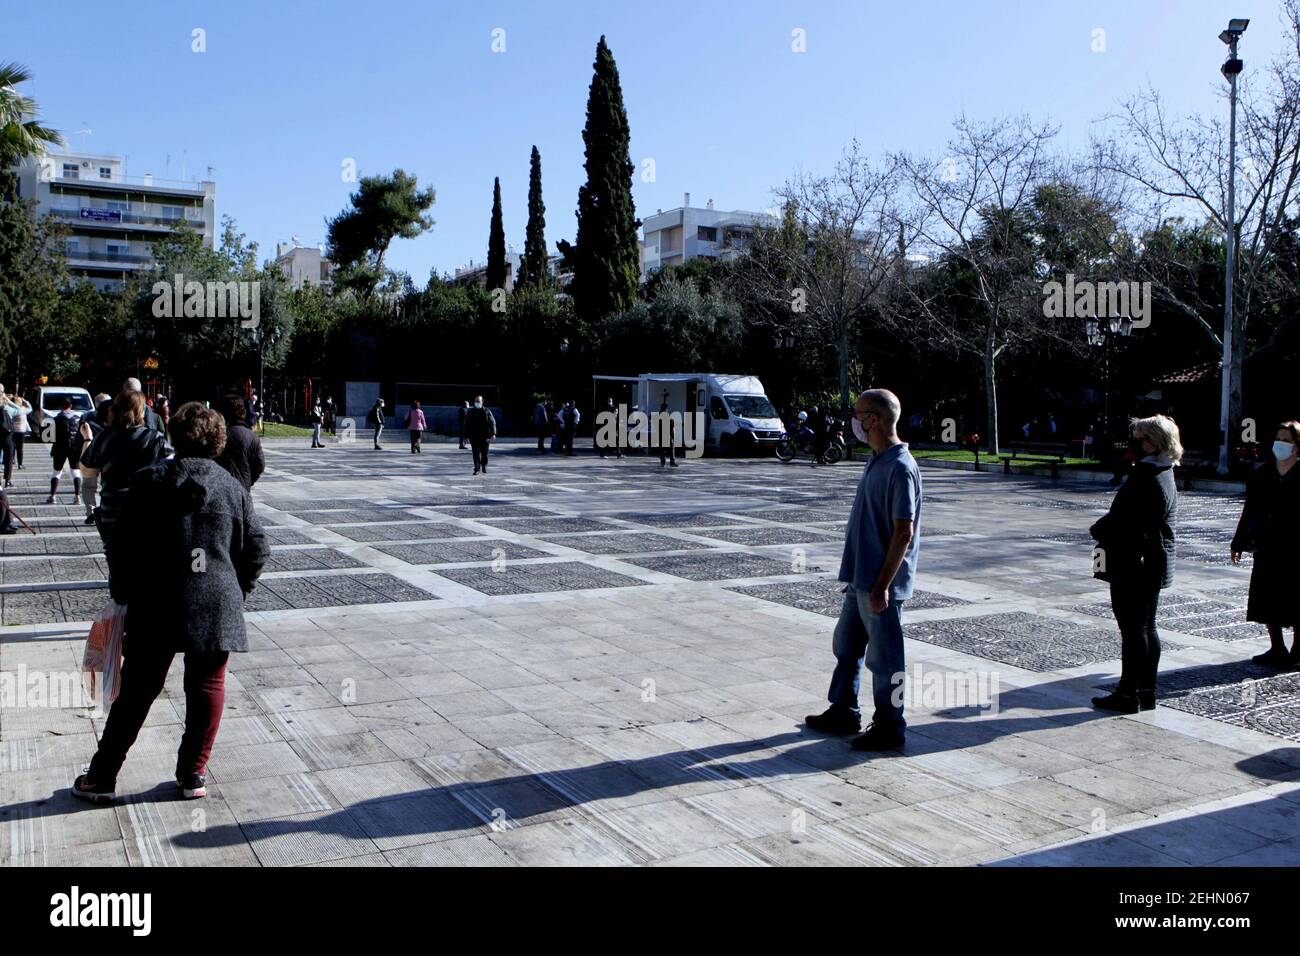 People wait in a queue to conduct rapid tests for the COVID-19 in Athens. The head of Greece’s medical association on Tuesday urged the government to agree to a tough lockdown of two to four weeks that would stem the progression of the novel coronavirus and especially its new, more virulent variant. Stock Photo